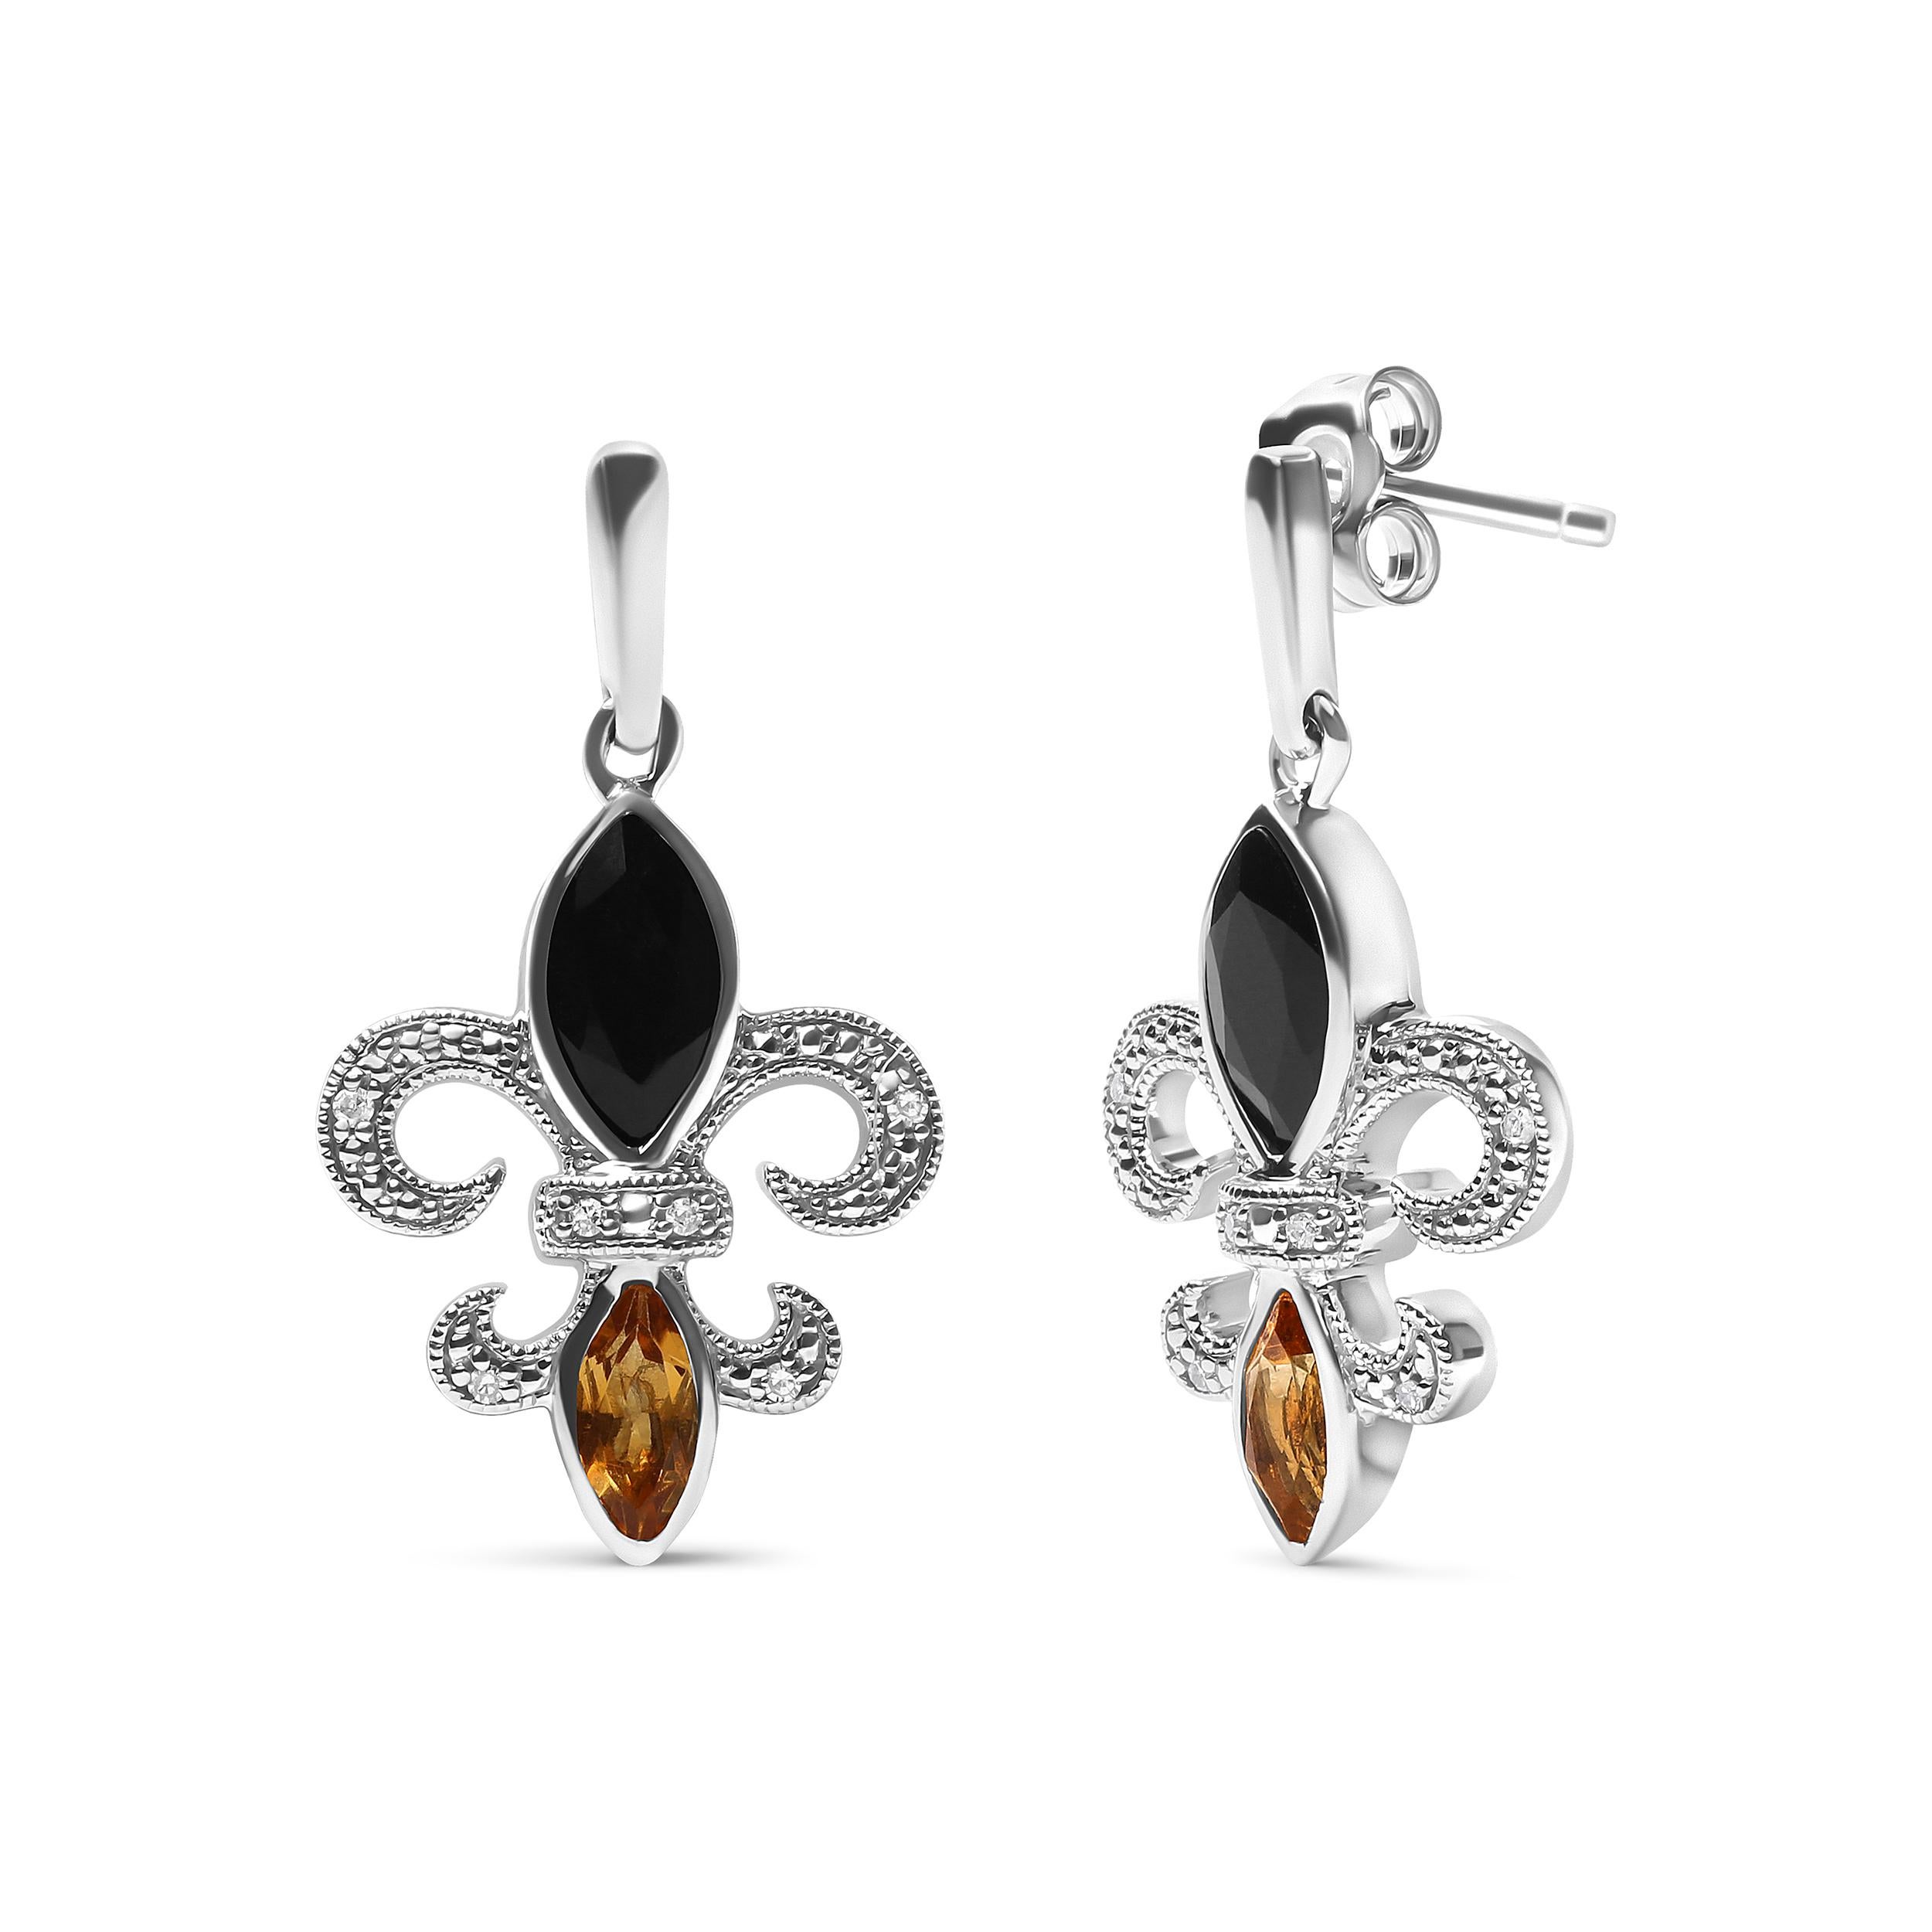 Enhance your jewelry collection with these exquisite sterling silver drop stud earrings. Crafted from .925 sterling silver, these earrings feature marquise-cut black onyx and citrine gemstones, beautifully set in bezel settings. The natural